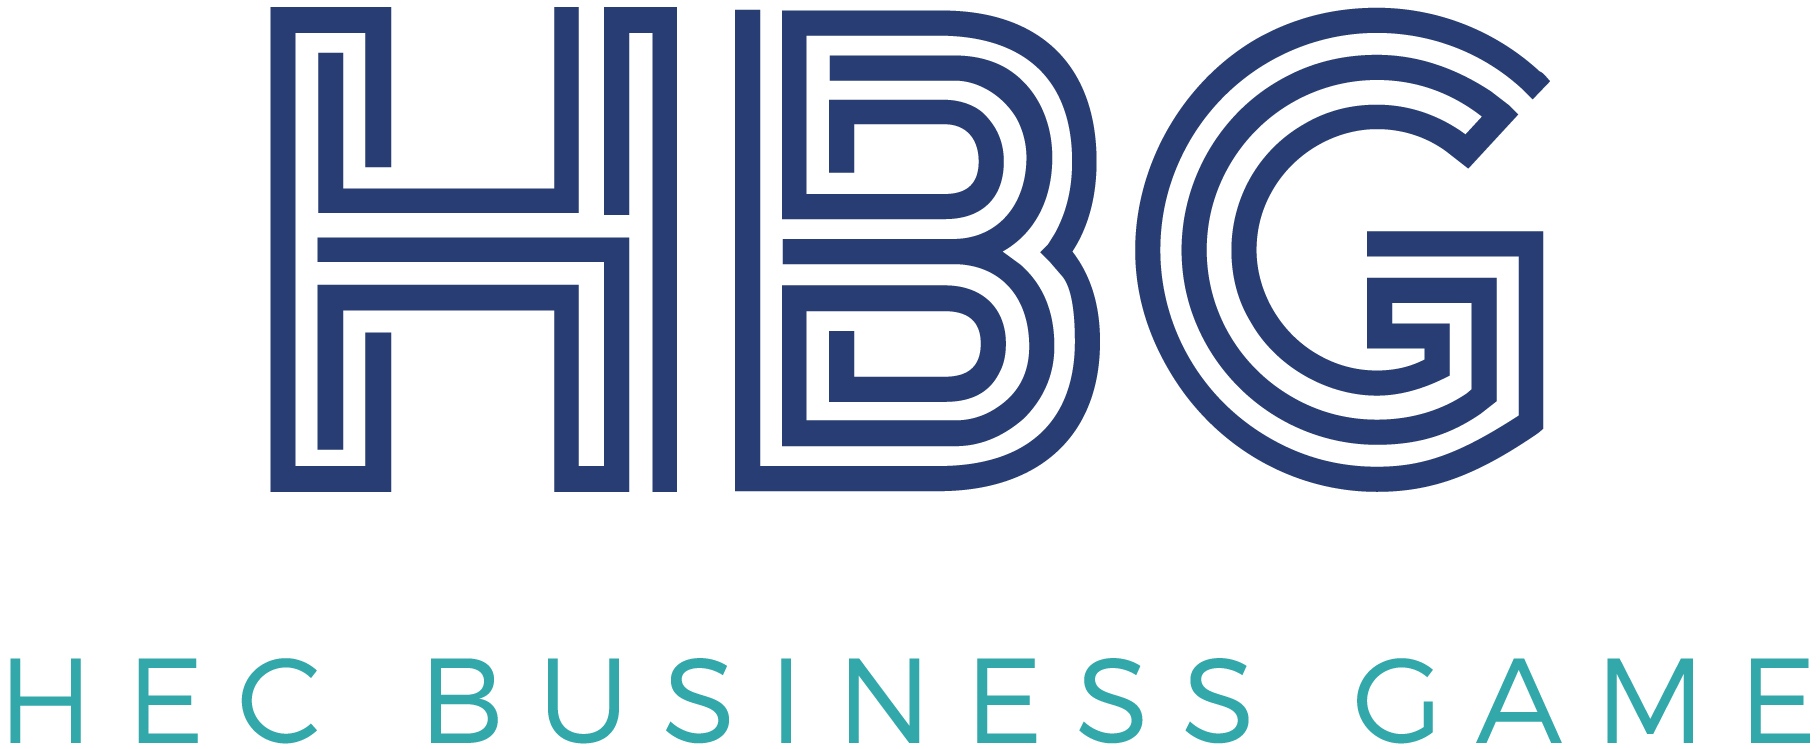 HEC business game